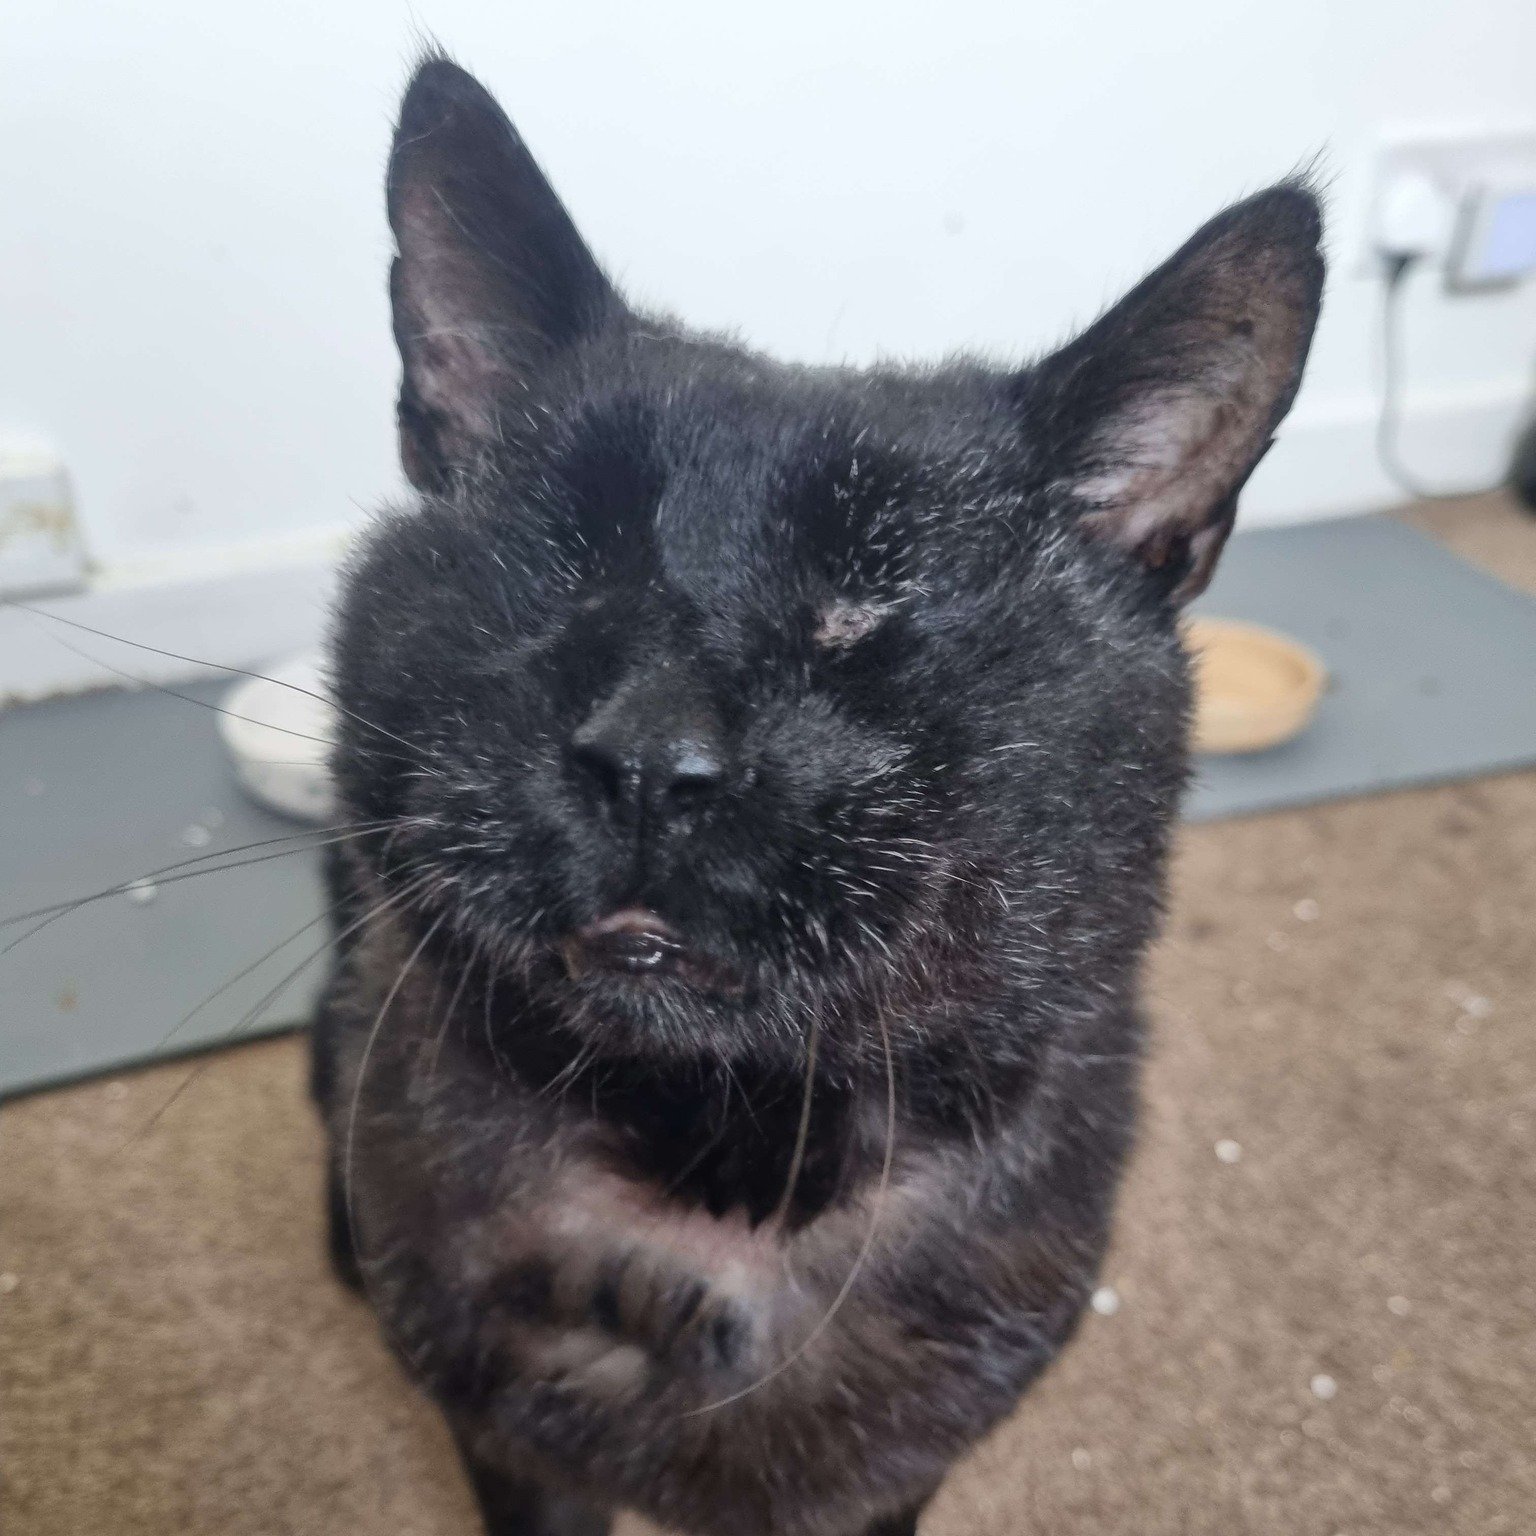 We are so excited to announce that Neo is ready to find his forever home!

This gorgeous boy has had a rough time of it, and we want him to find a sofa to spend his golden years on where he can cuddle with his forever family.

Neo is completely blind